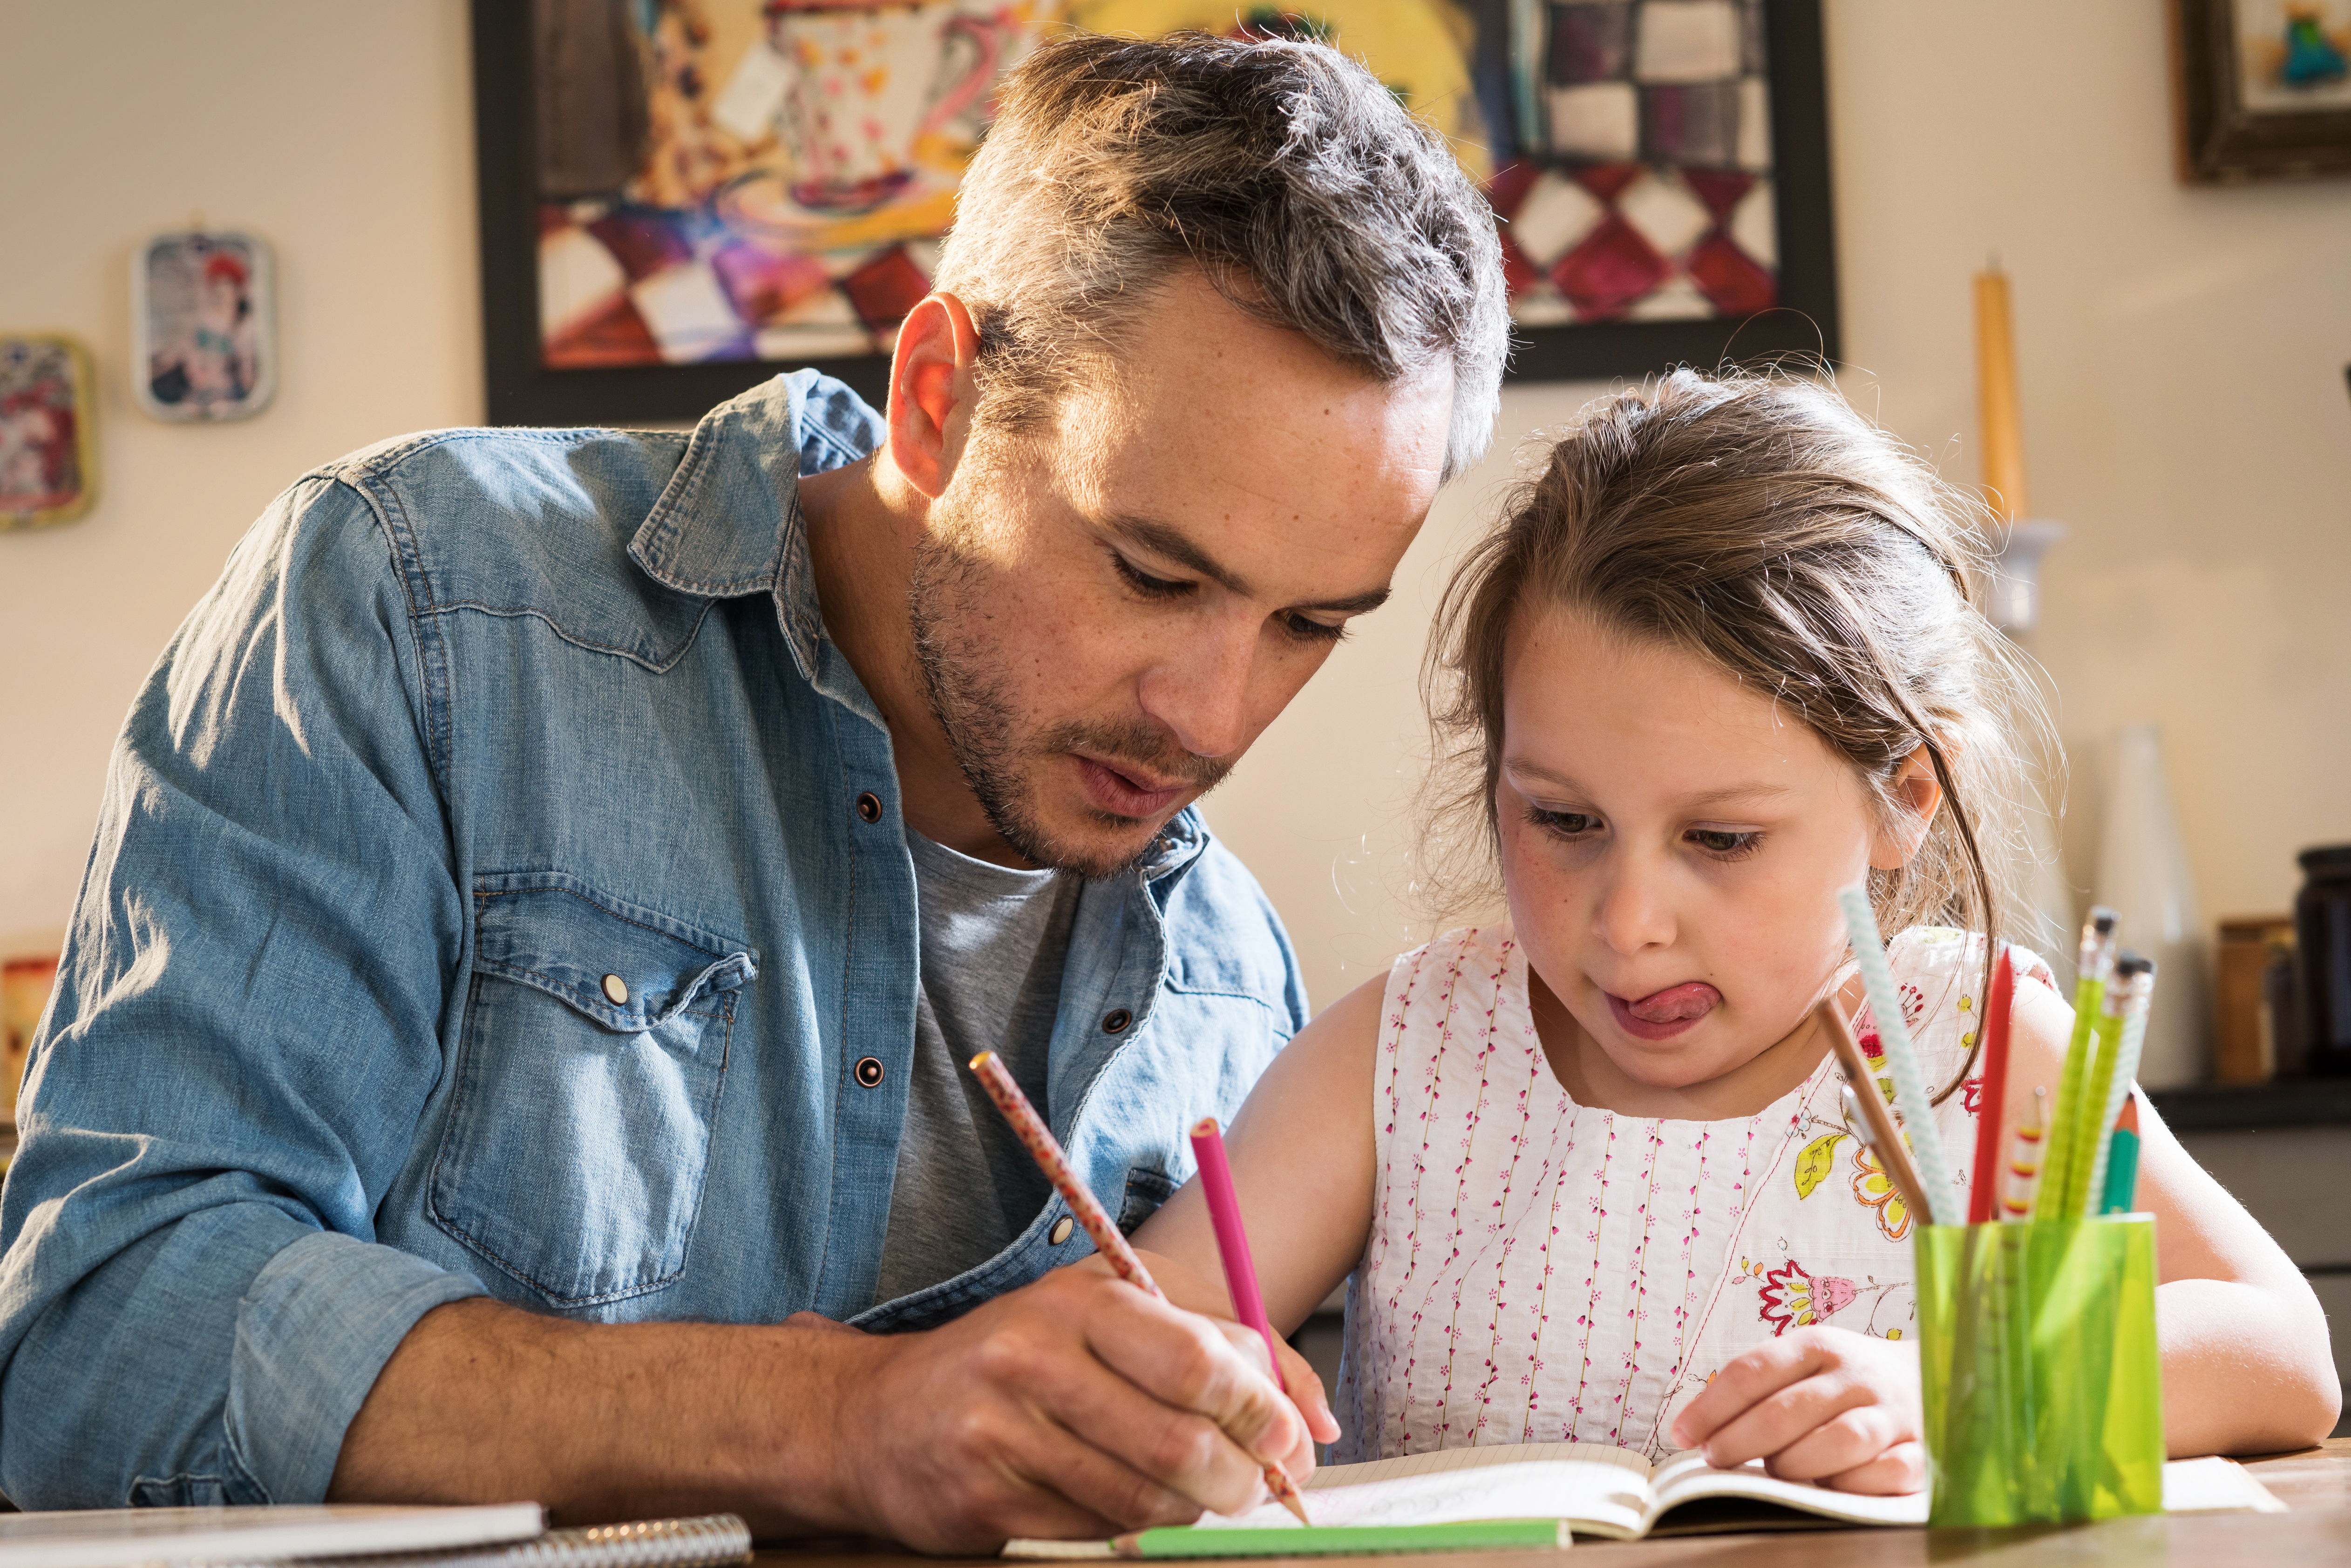 A man helping a child with her homework | Source: Shutterstock